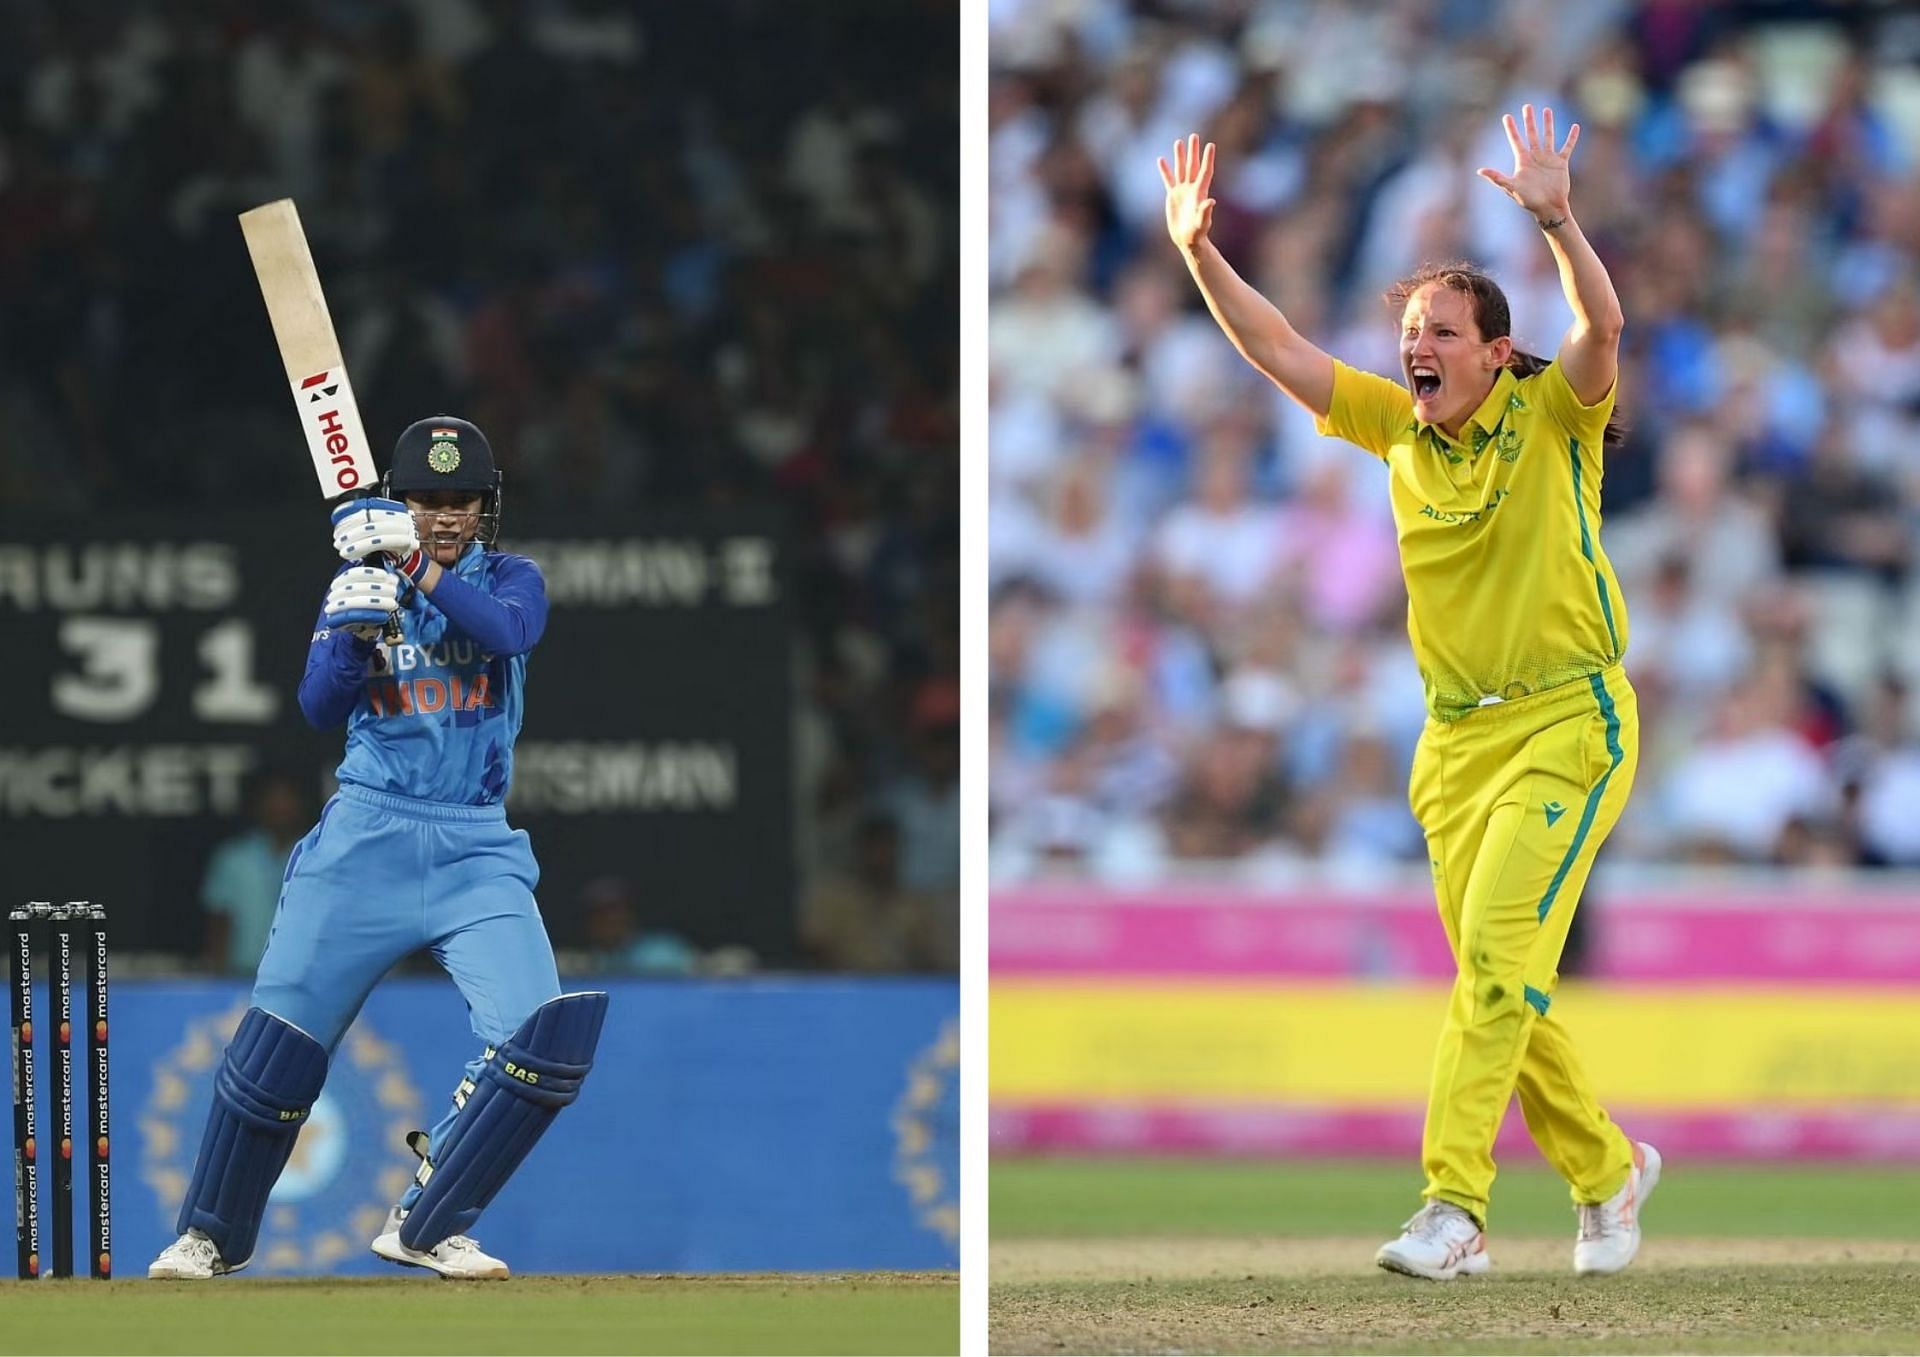 The battle between Megan Schutt and Smriti Mandhana could define which way the 3rd T20I between India and Australia heads.